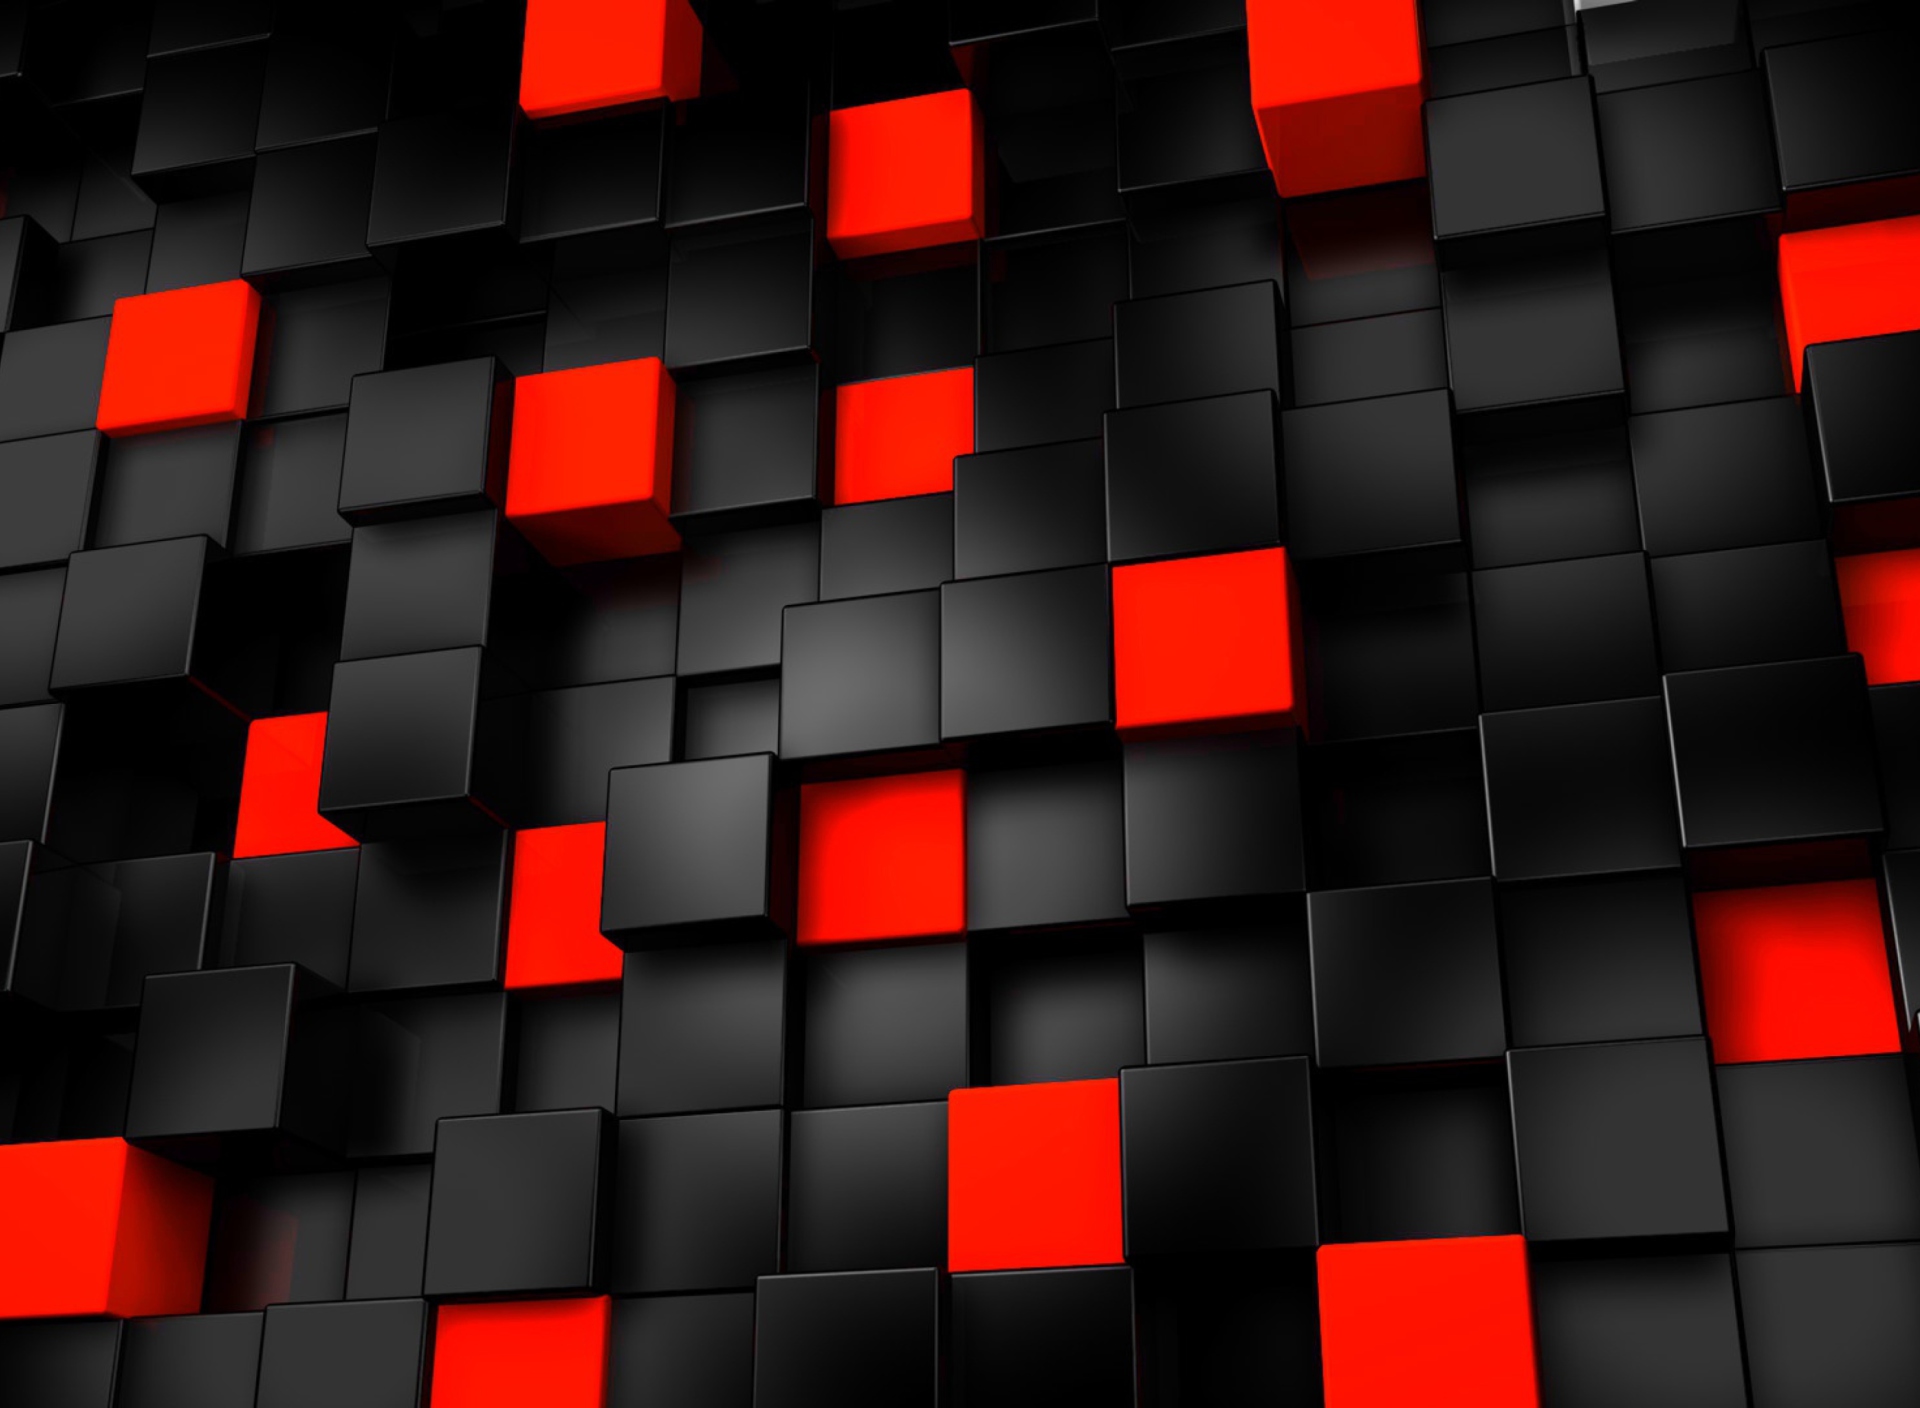 Sfondi Abstract Black And Red Cubes 1920x1408